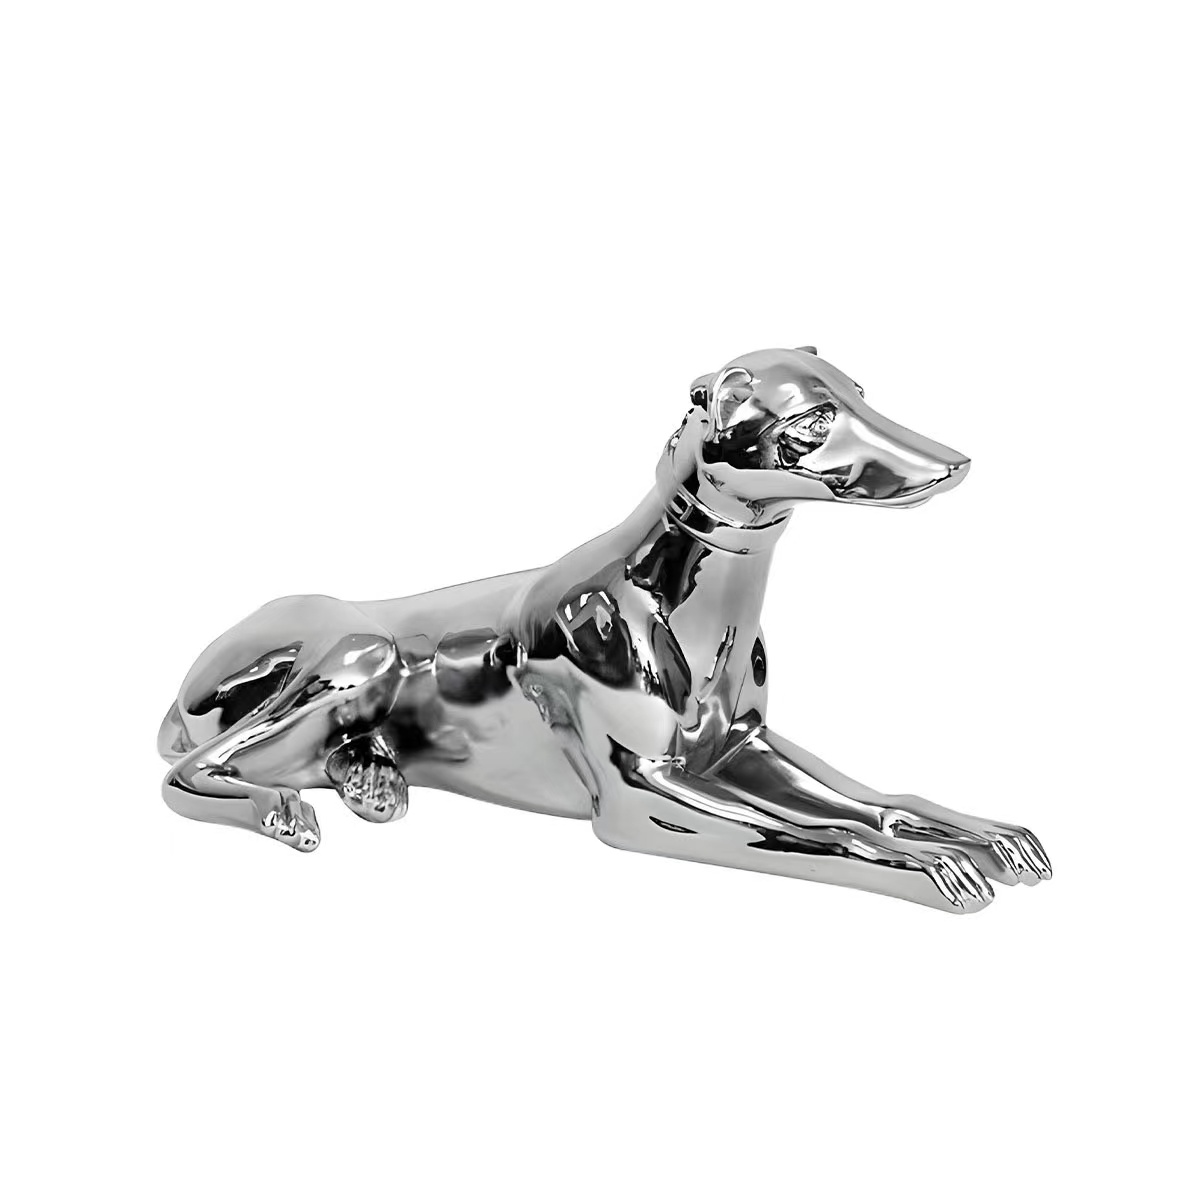 Modern Resin Dog Statue Contemporary Art Sculpture For Home Decoration 